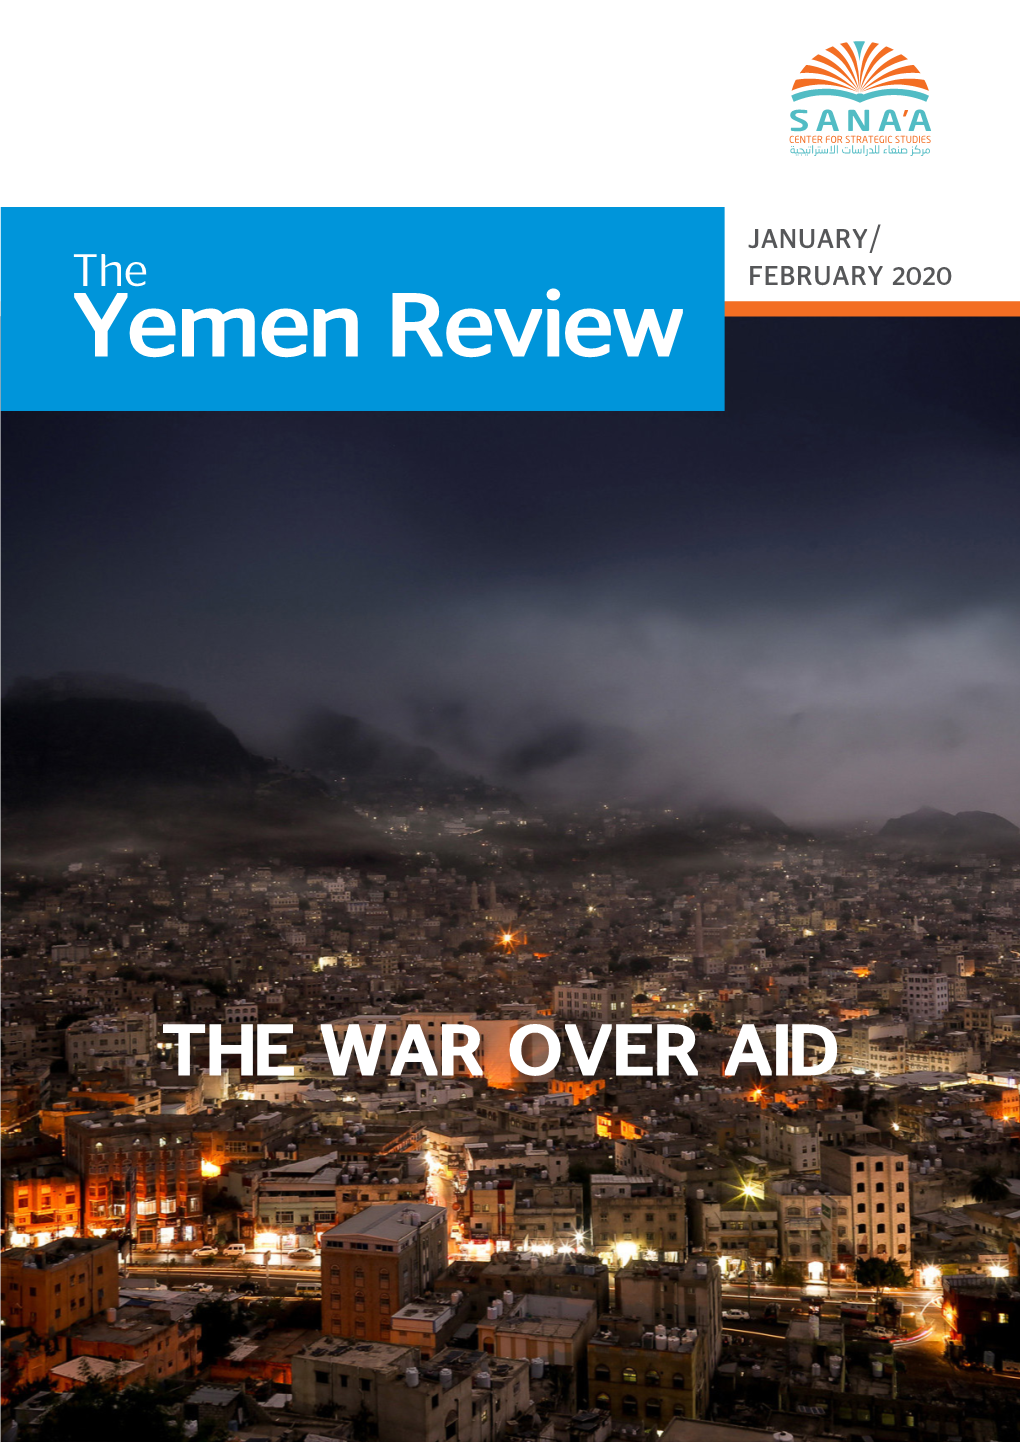 The War Over Aid – the Yemen Review, January/February 2020